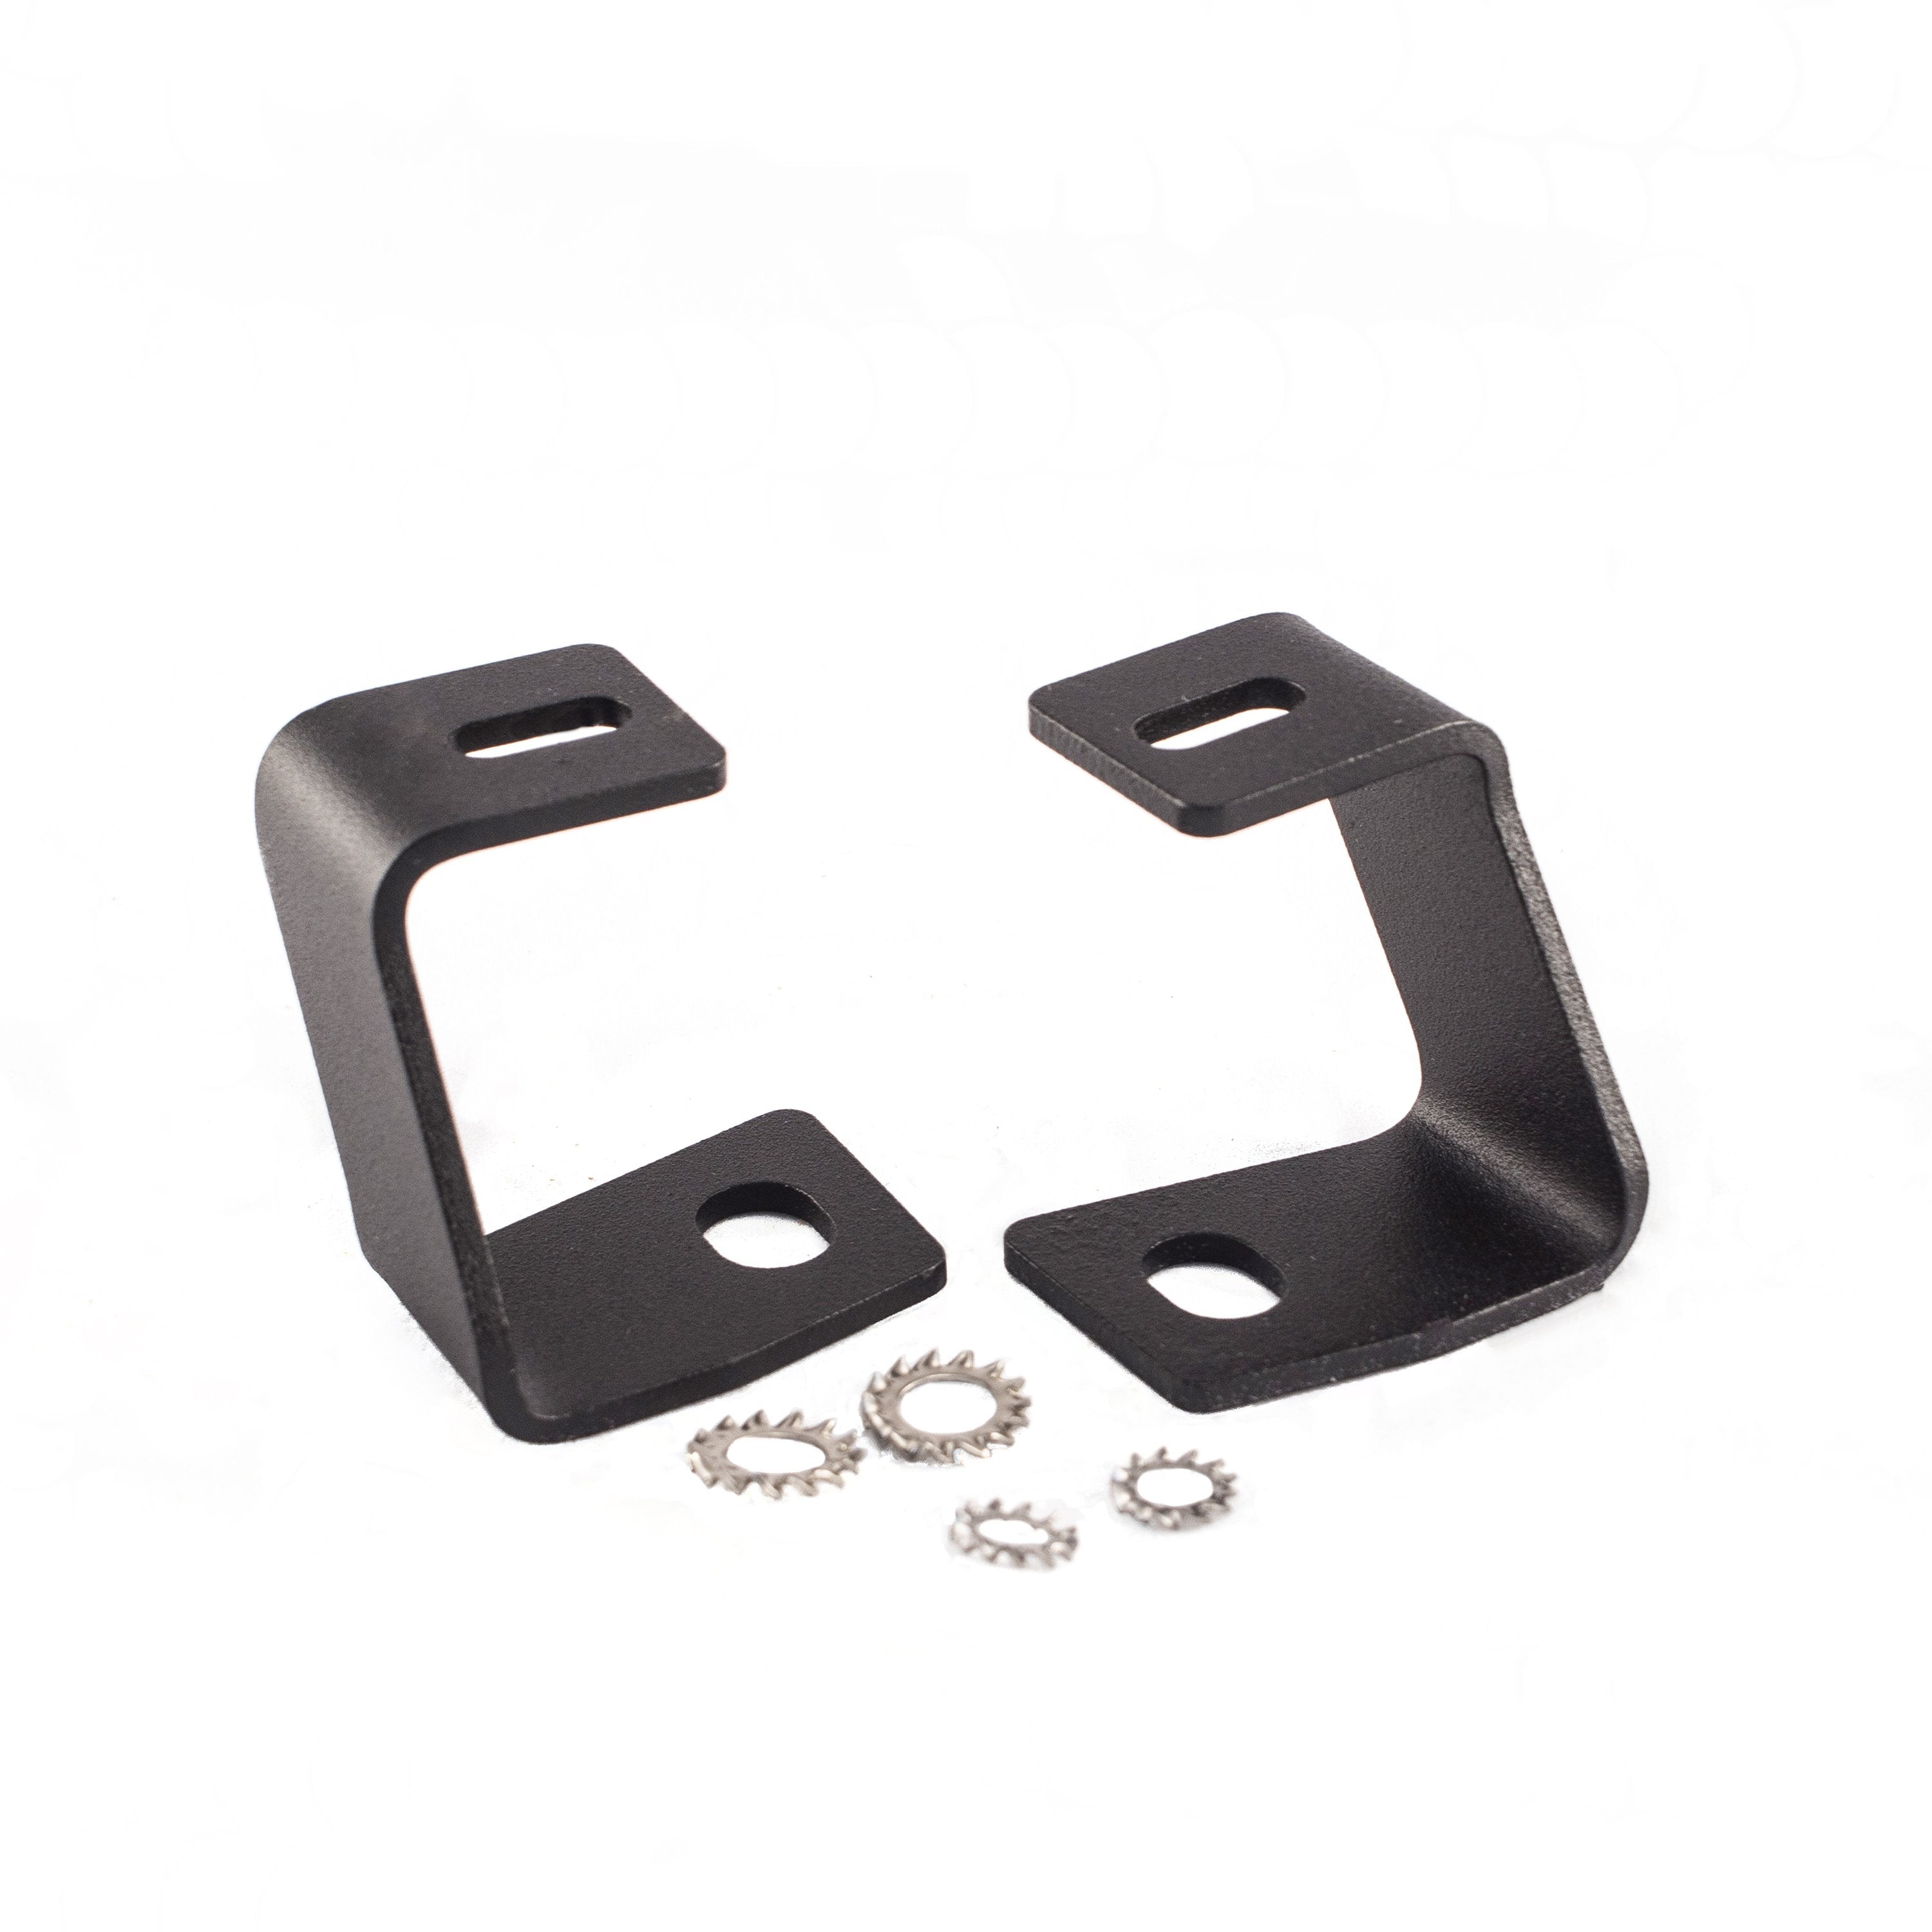 Ford F Series and Ranger Brackets and Mounting Hardware